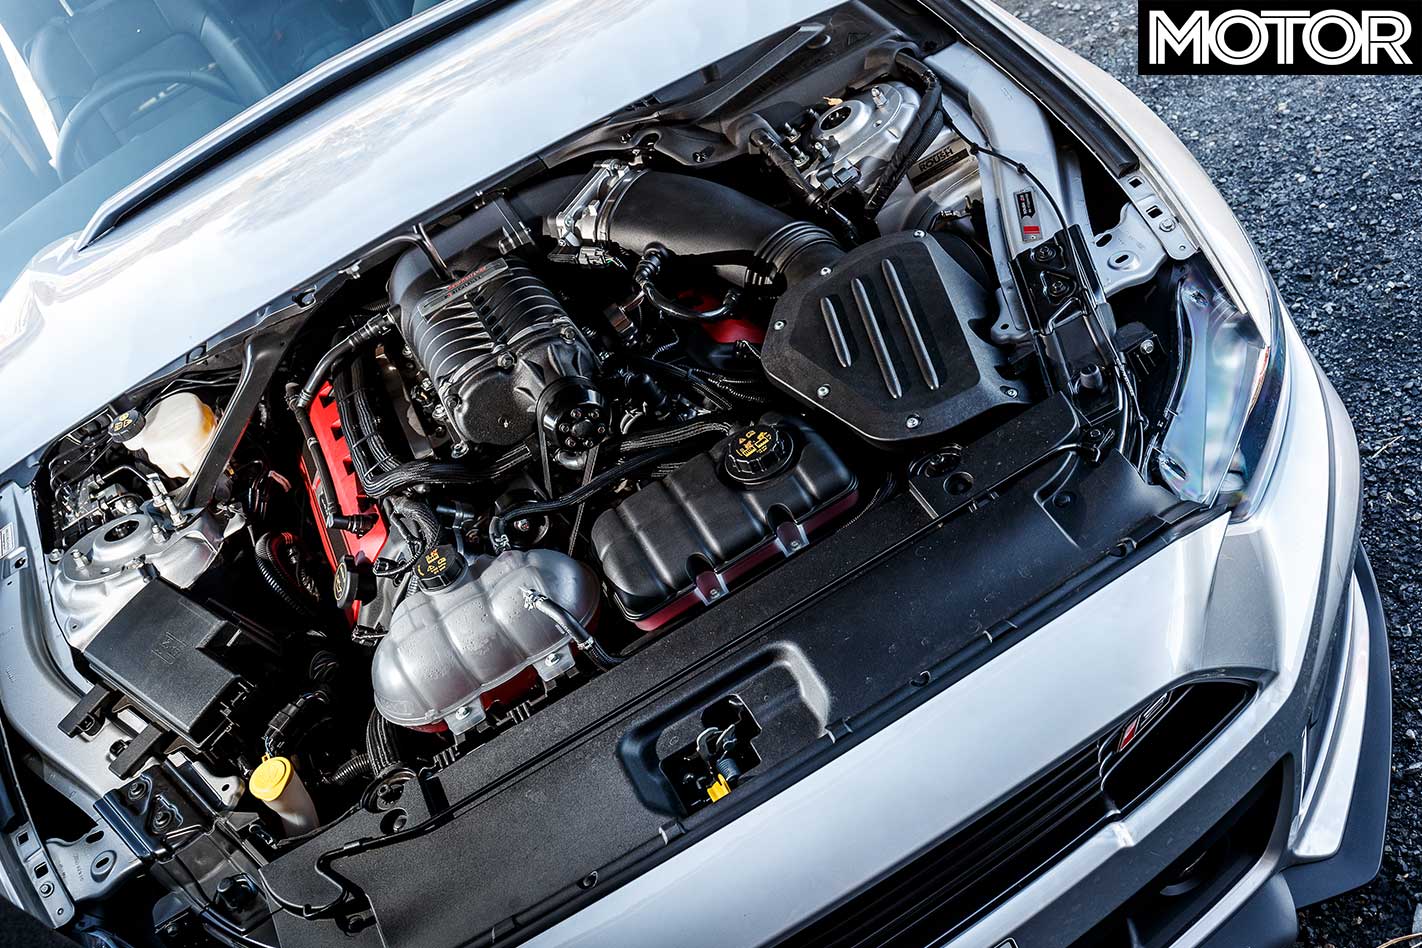 2018 ROUSH Stage Mustang supercharged engine